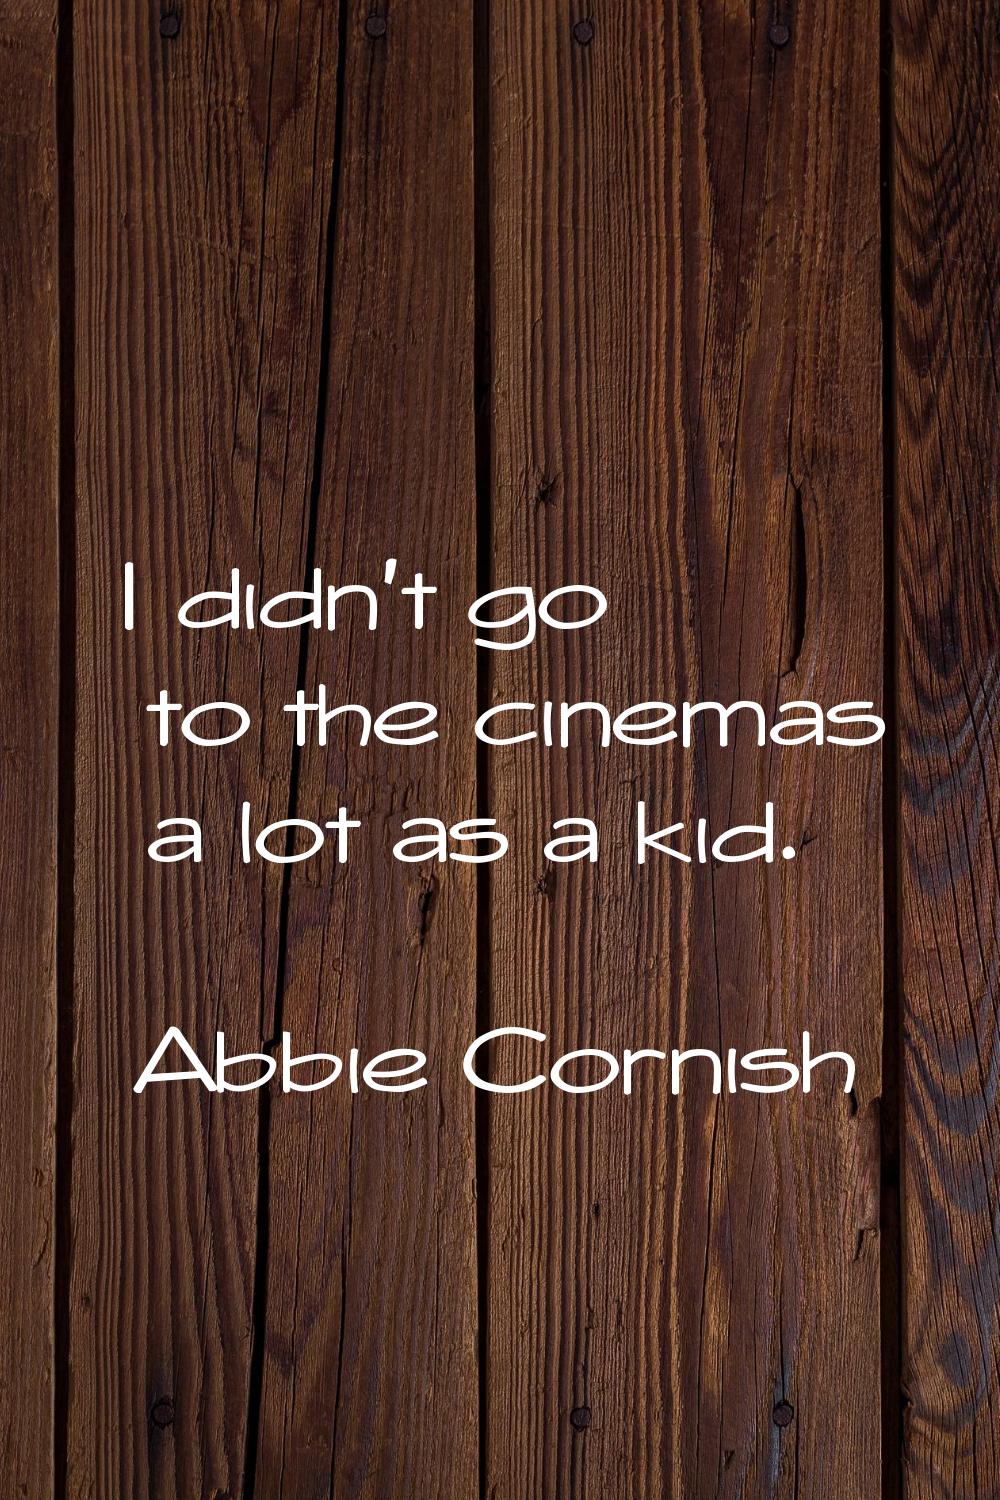 I didn't go to the cinemas a lot as a kid.